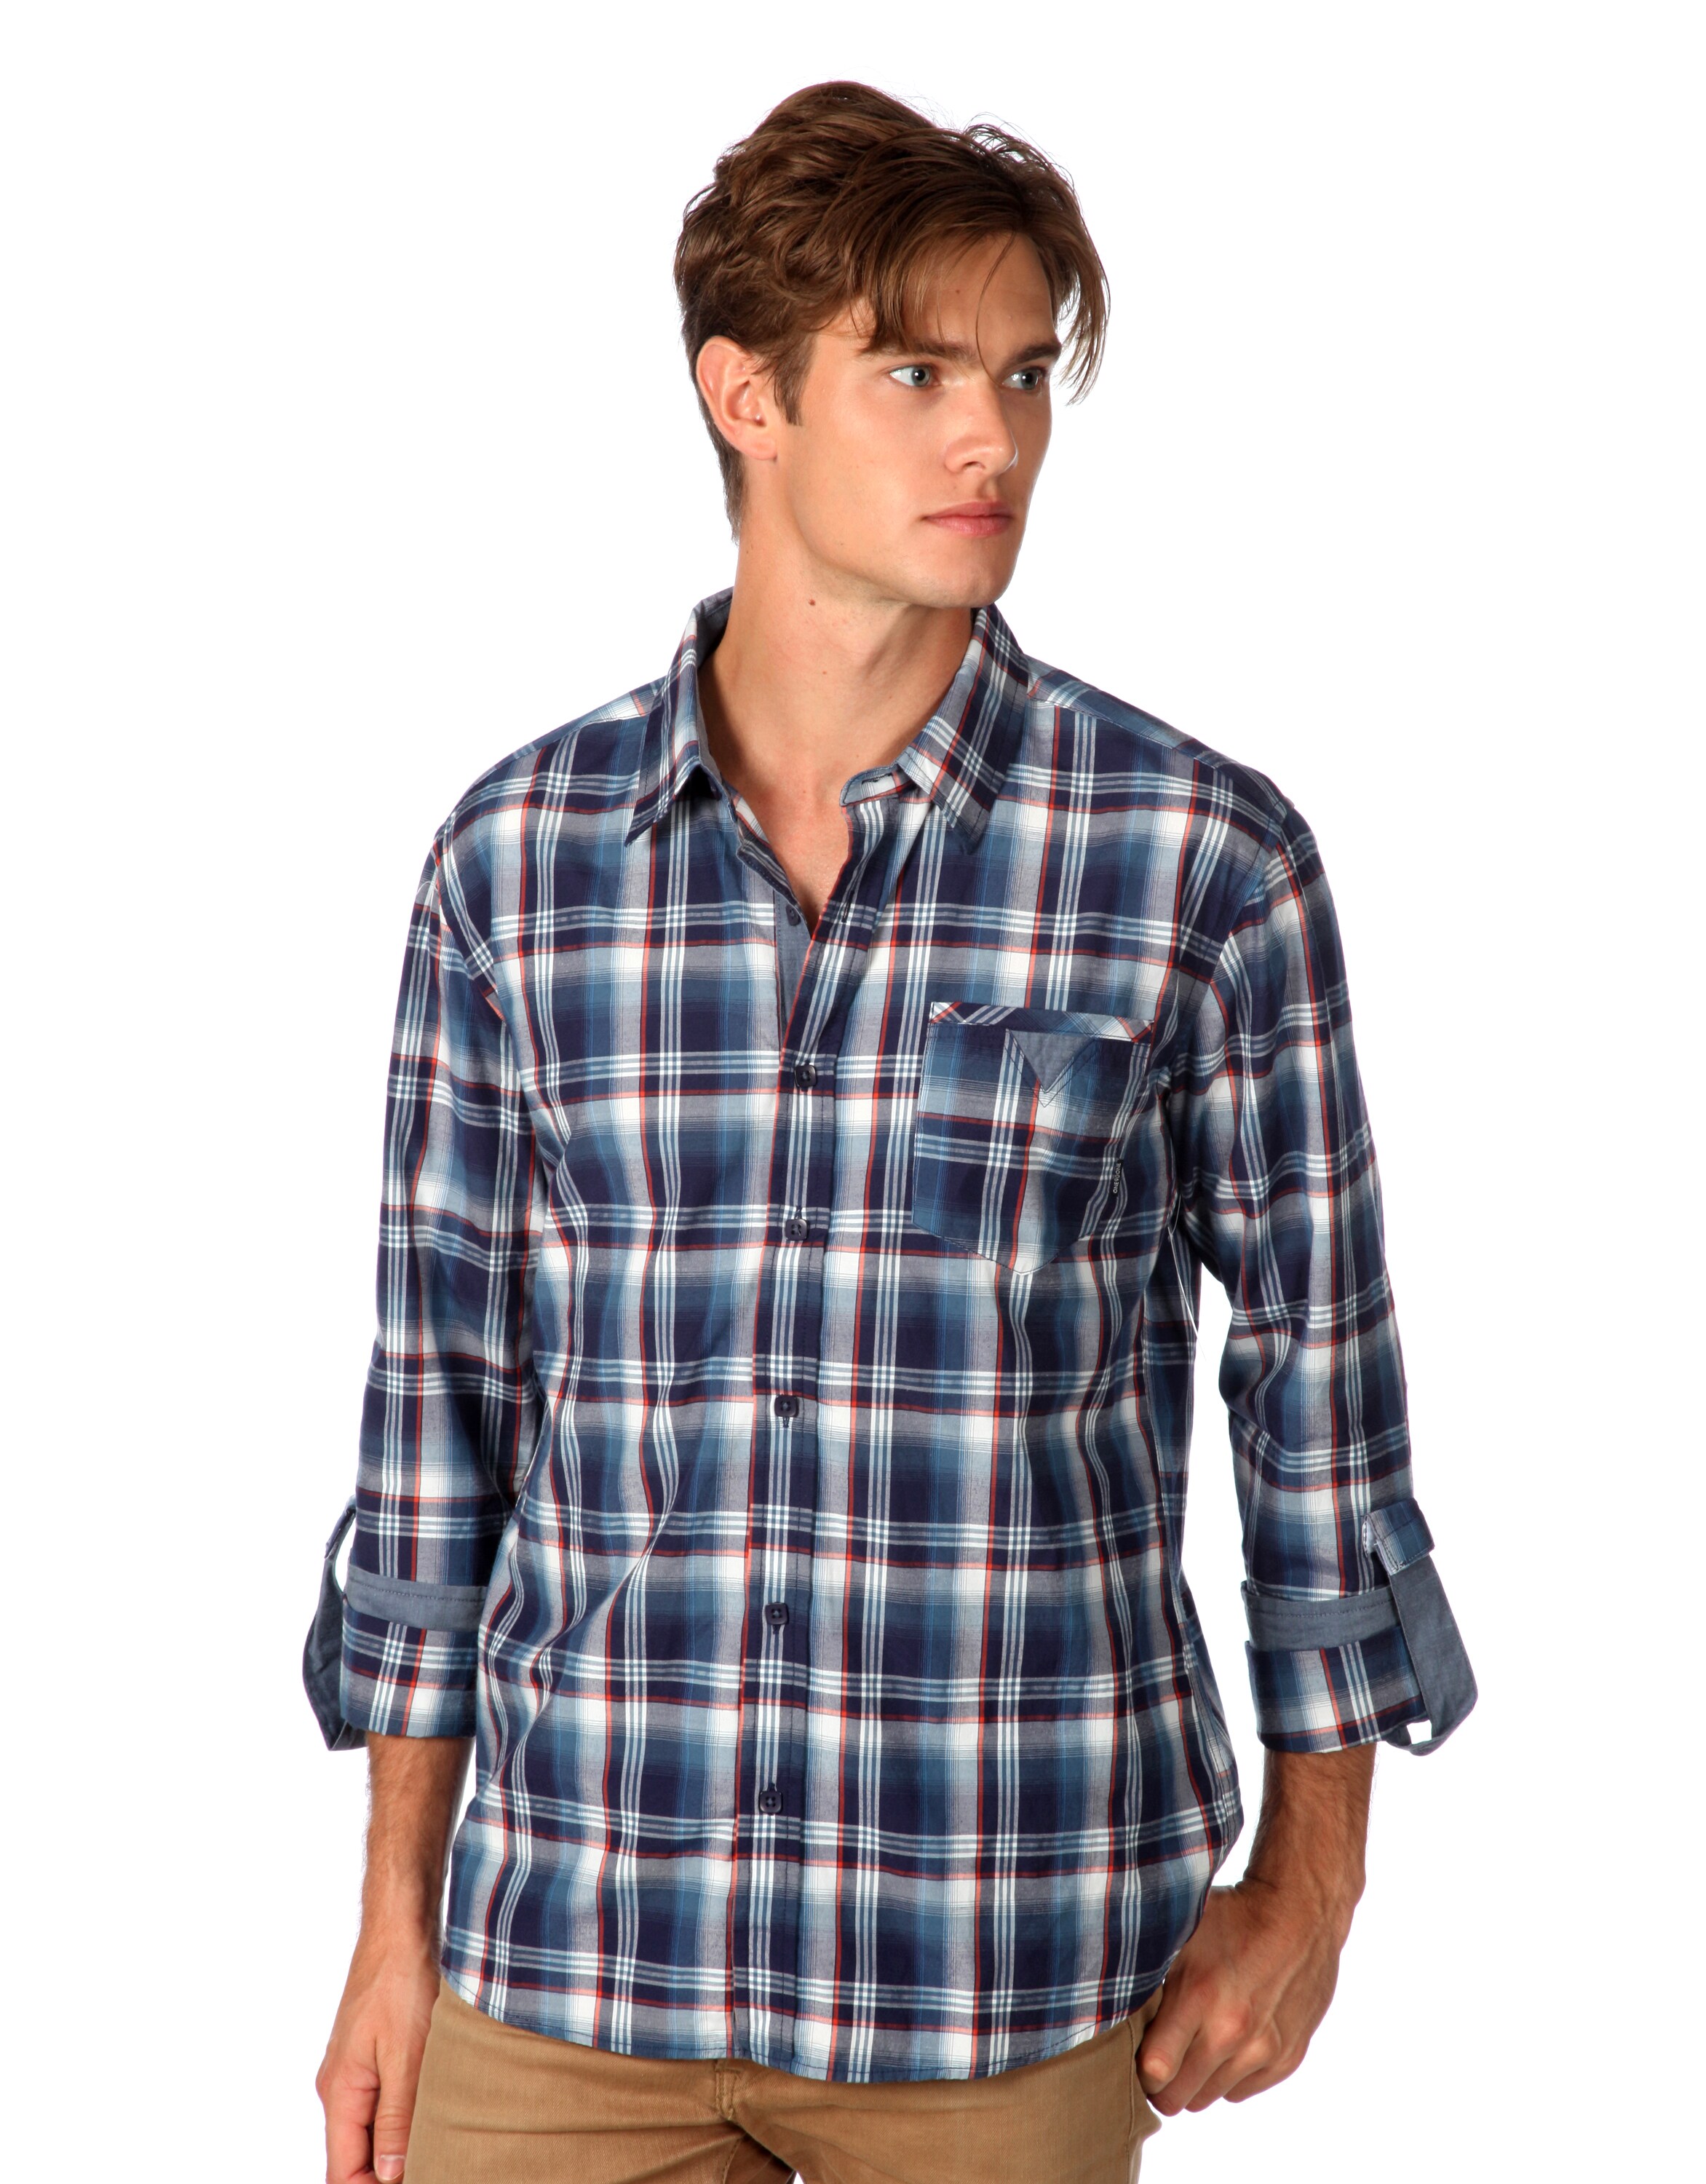 Plaid Casual Shirts | Overstock.com Shopping - The Best Prices on ...